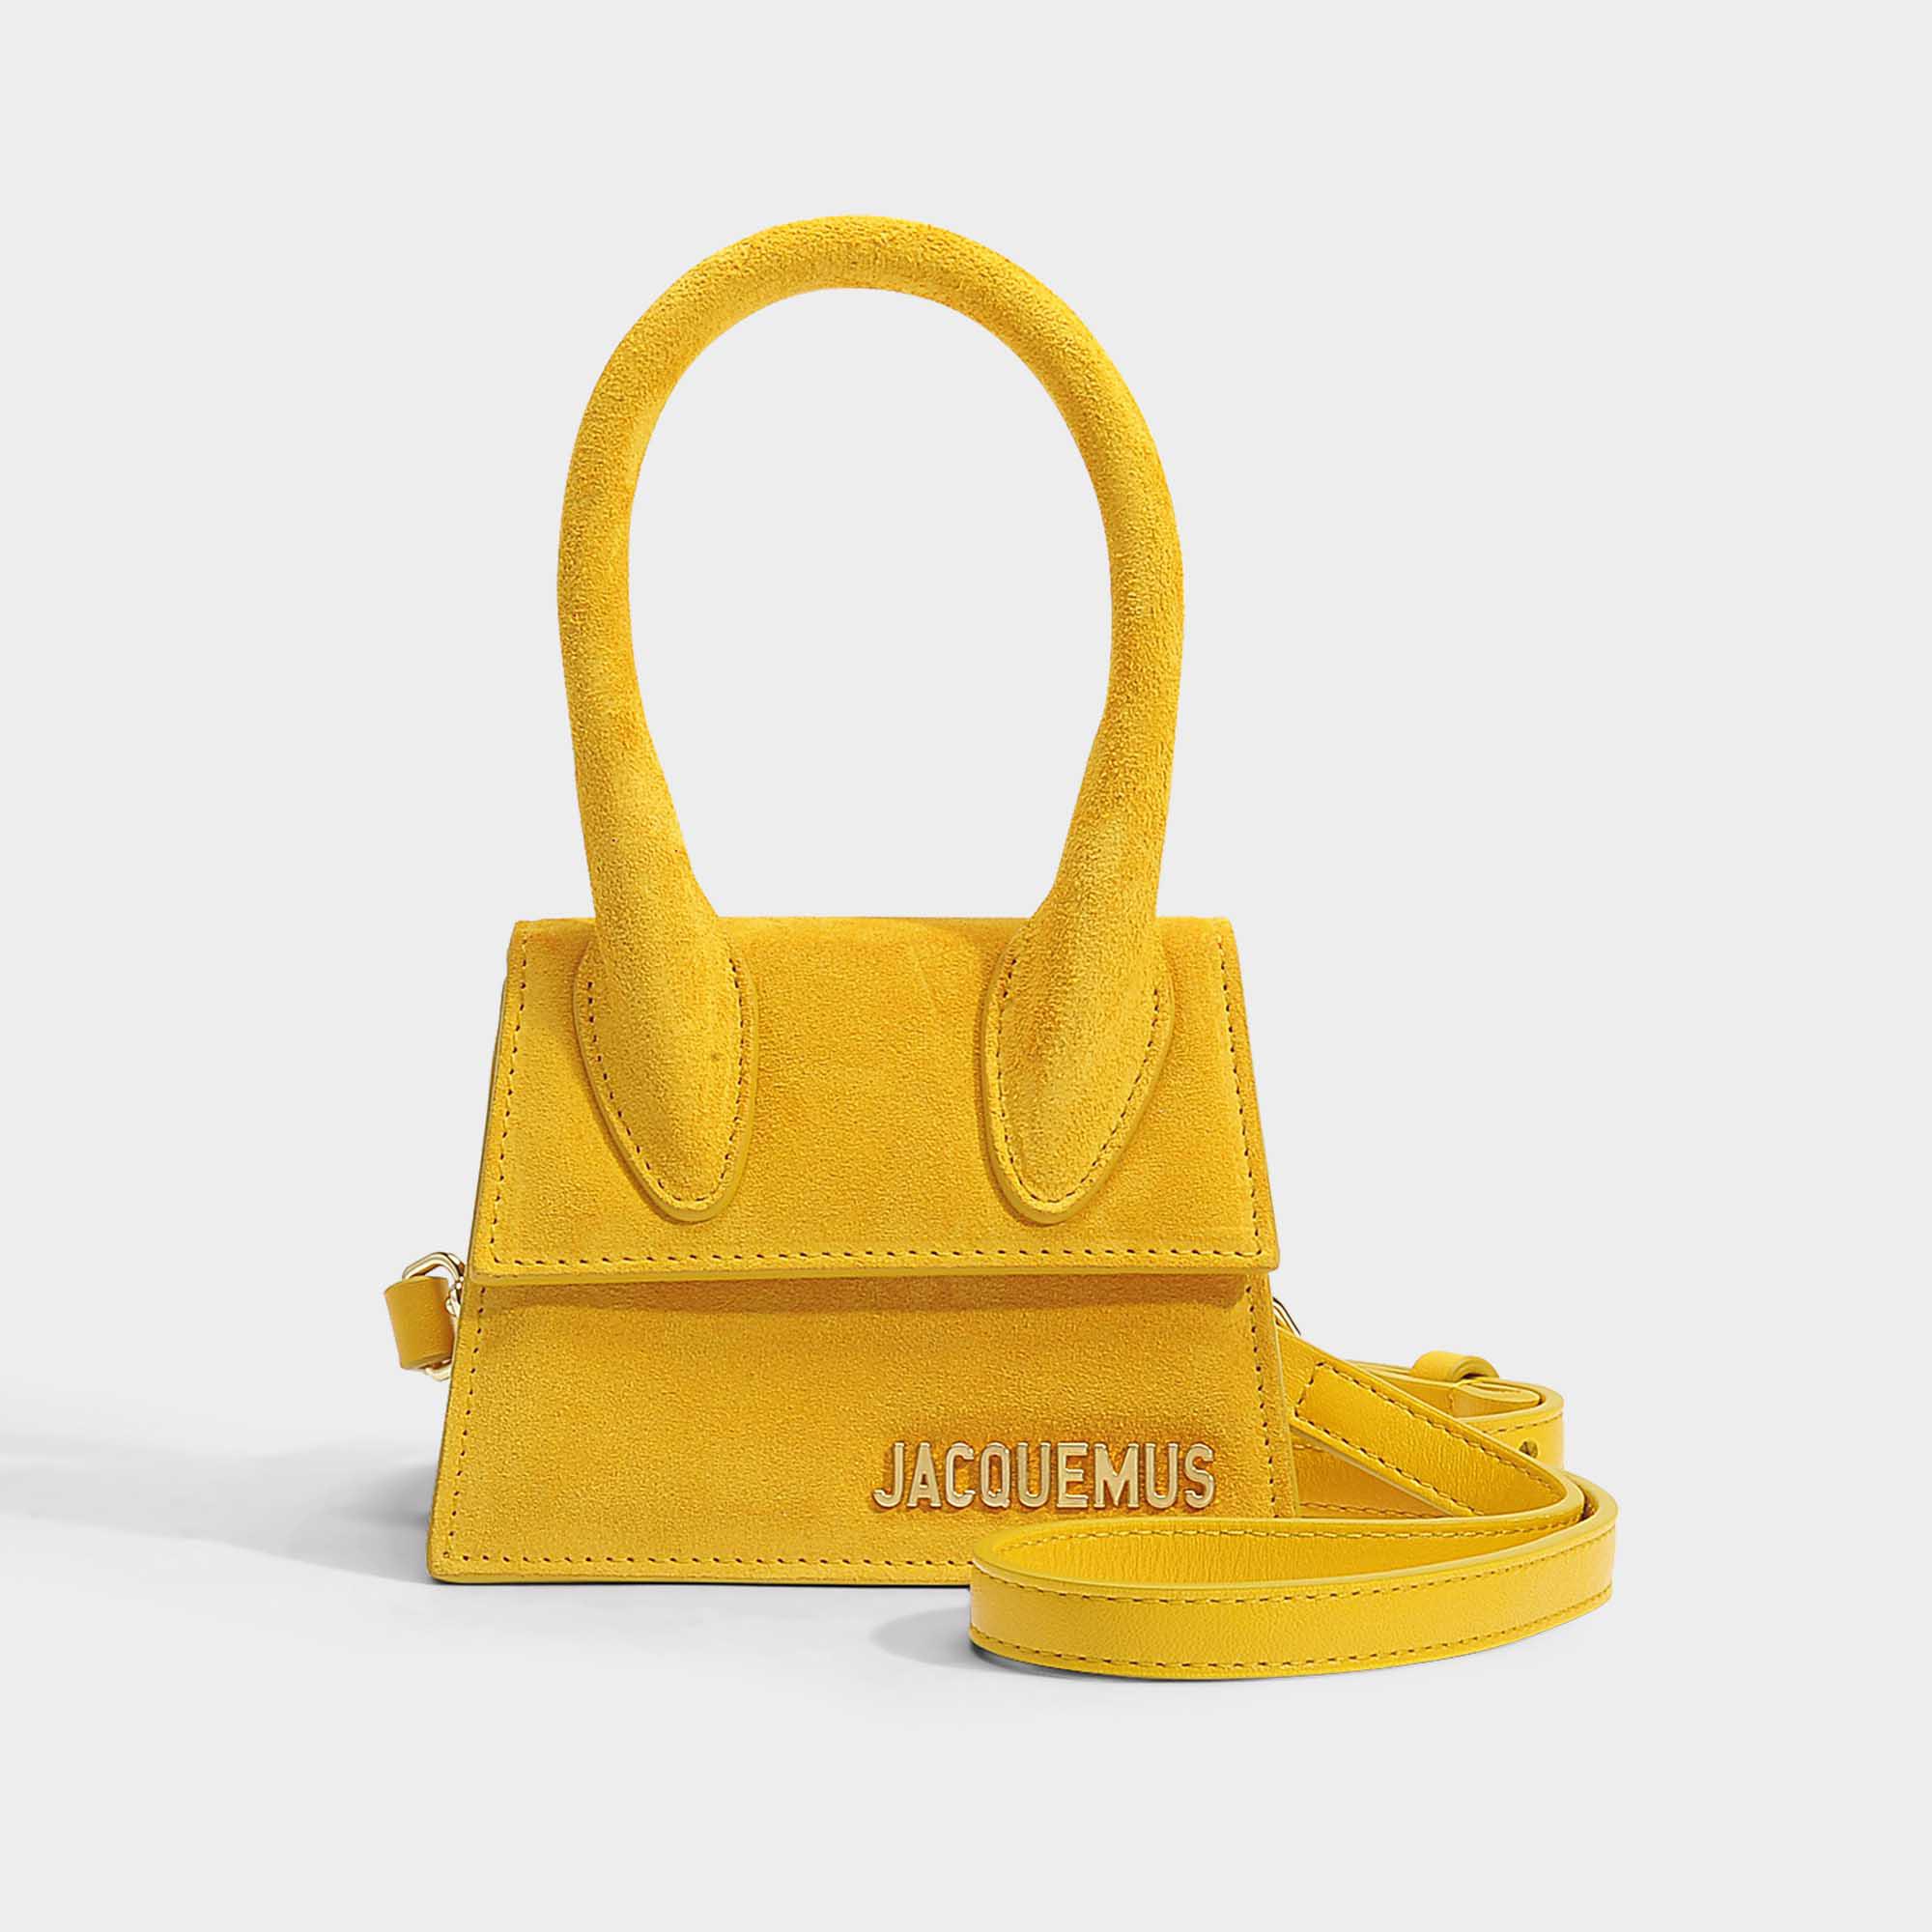 Jacquemus Chiquito Bag In Yellow Suede in Yellow - Lyst